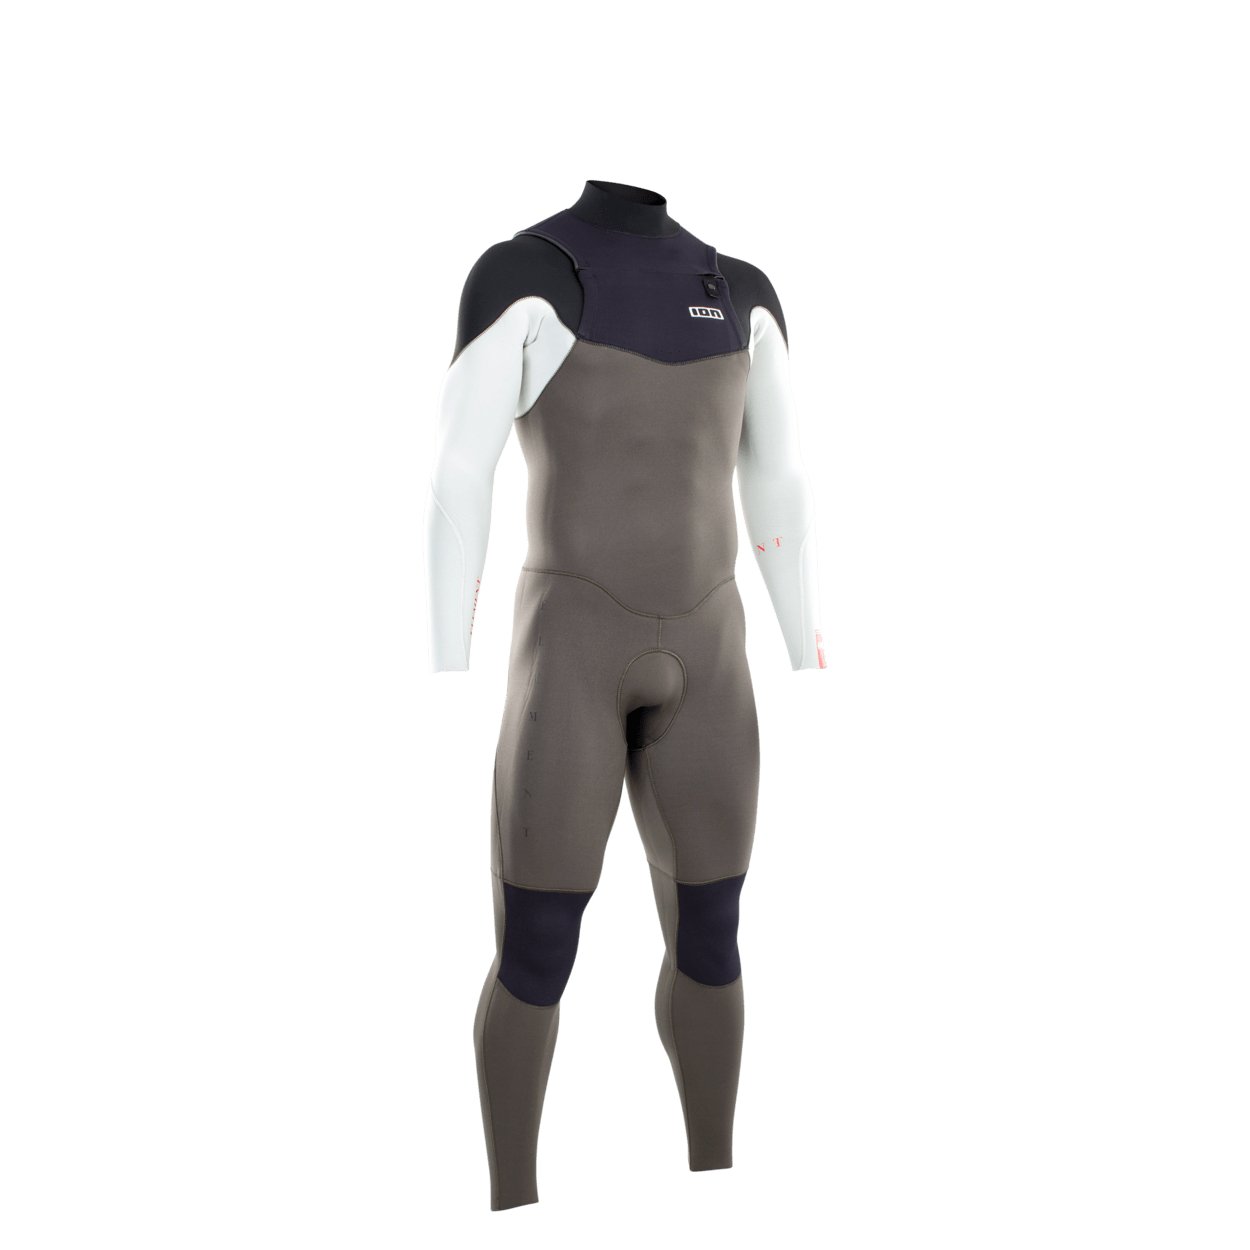 ION Men Wetsuit Element 4/3 Front Zip 2022 - Worthing Watersports - 9008415950256 - Wetsuits - ION Water